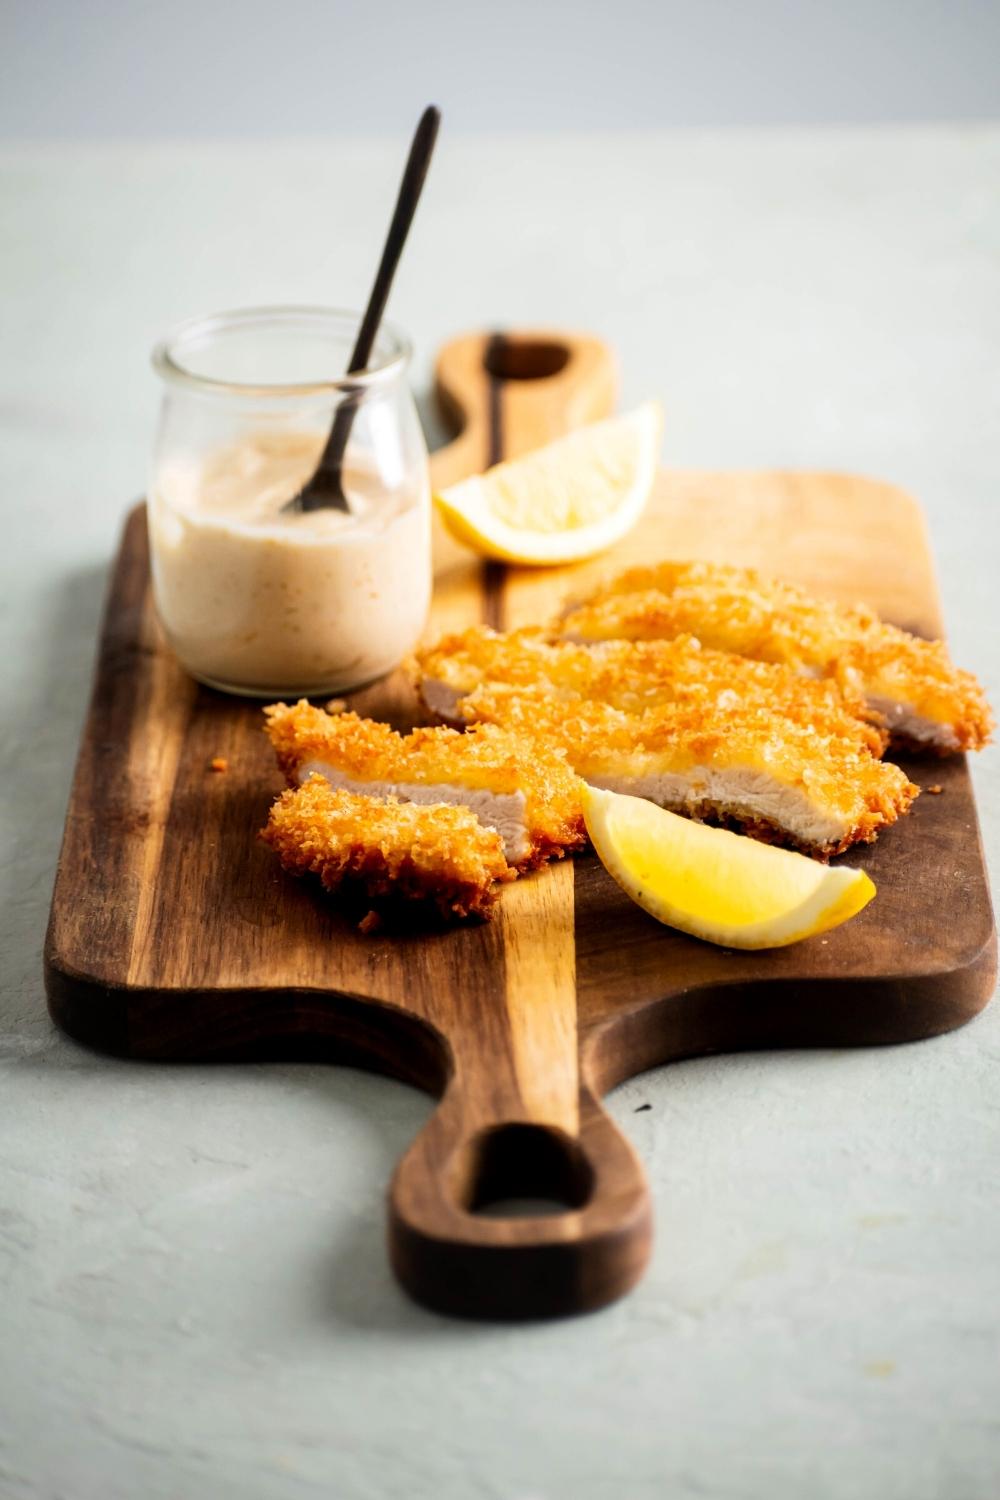 A chicken cutlet that is sliced into strips on a wooden cutting board. There are two lemon wedges in a jar of chipotle mayo on the cutting board.